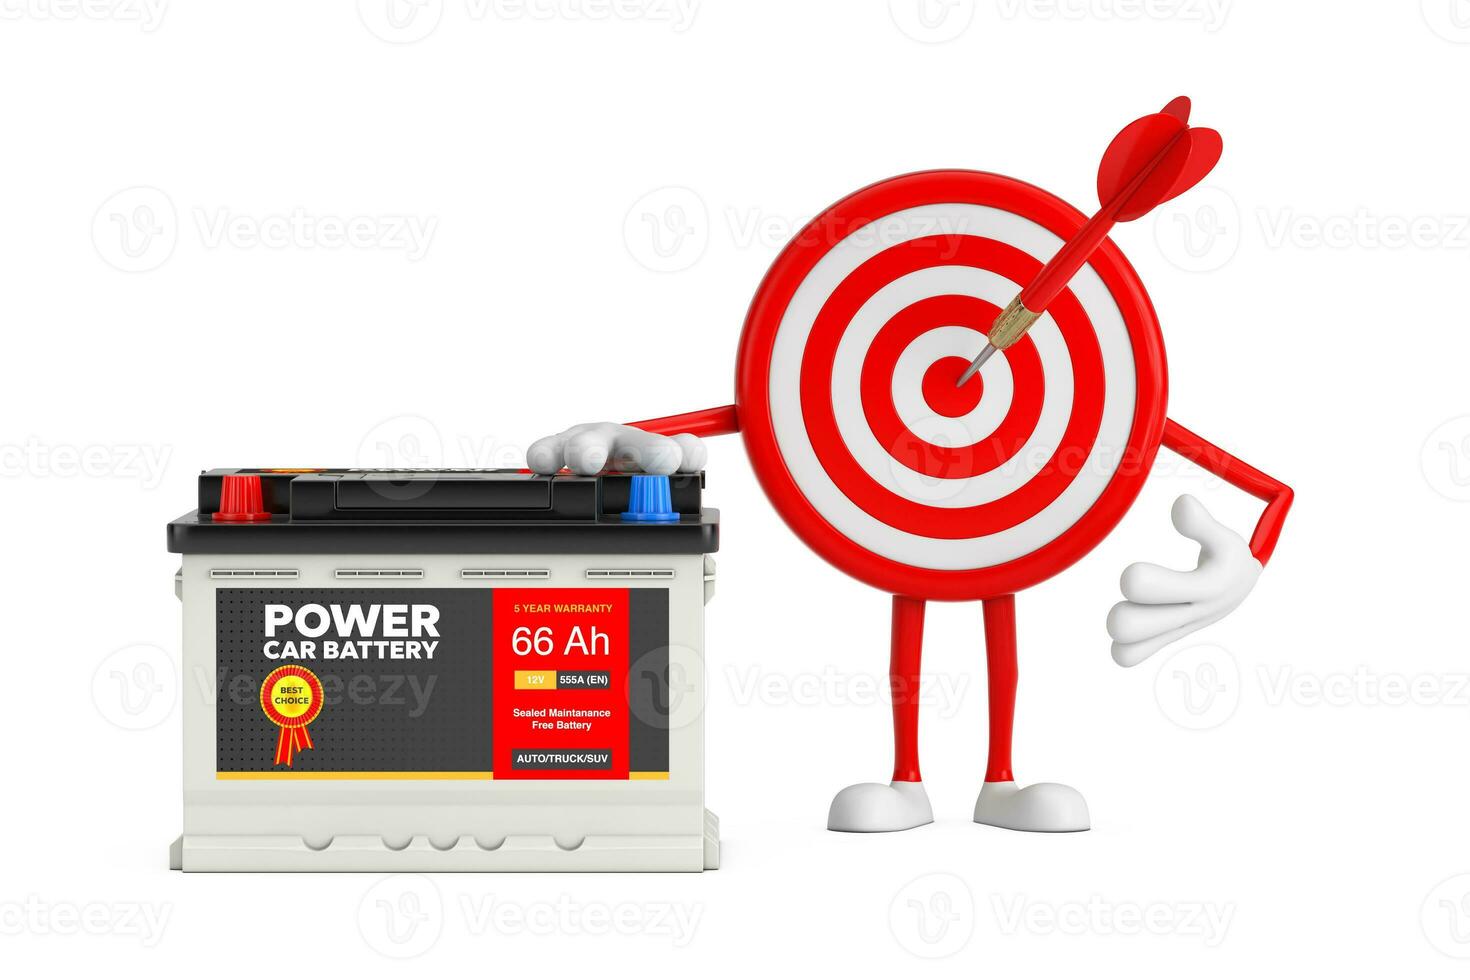 Archery Target and Dart in Center Cartoon Person Character Mascot and Rechargeable Car Battery 12V Accumulator with Abstract Label. 3d Rendering photo